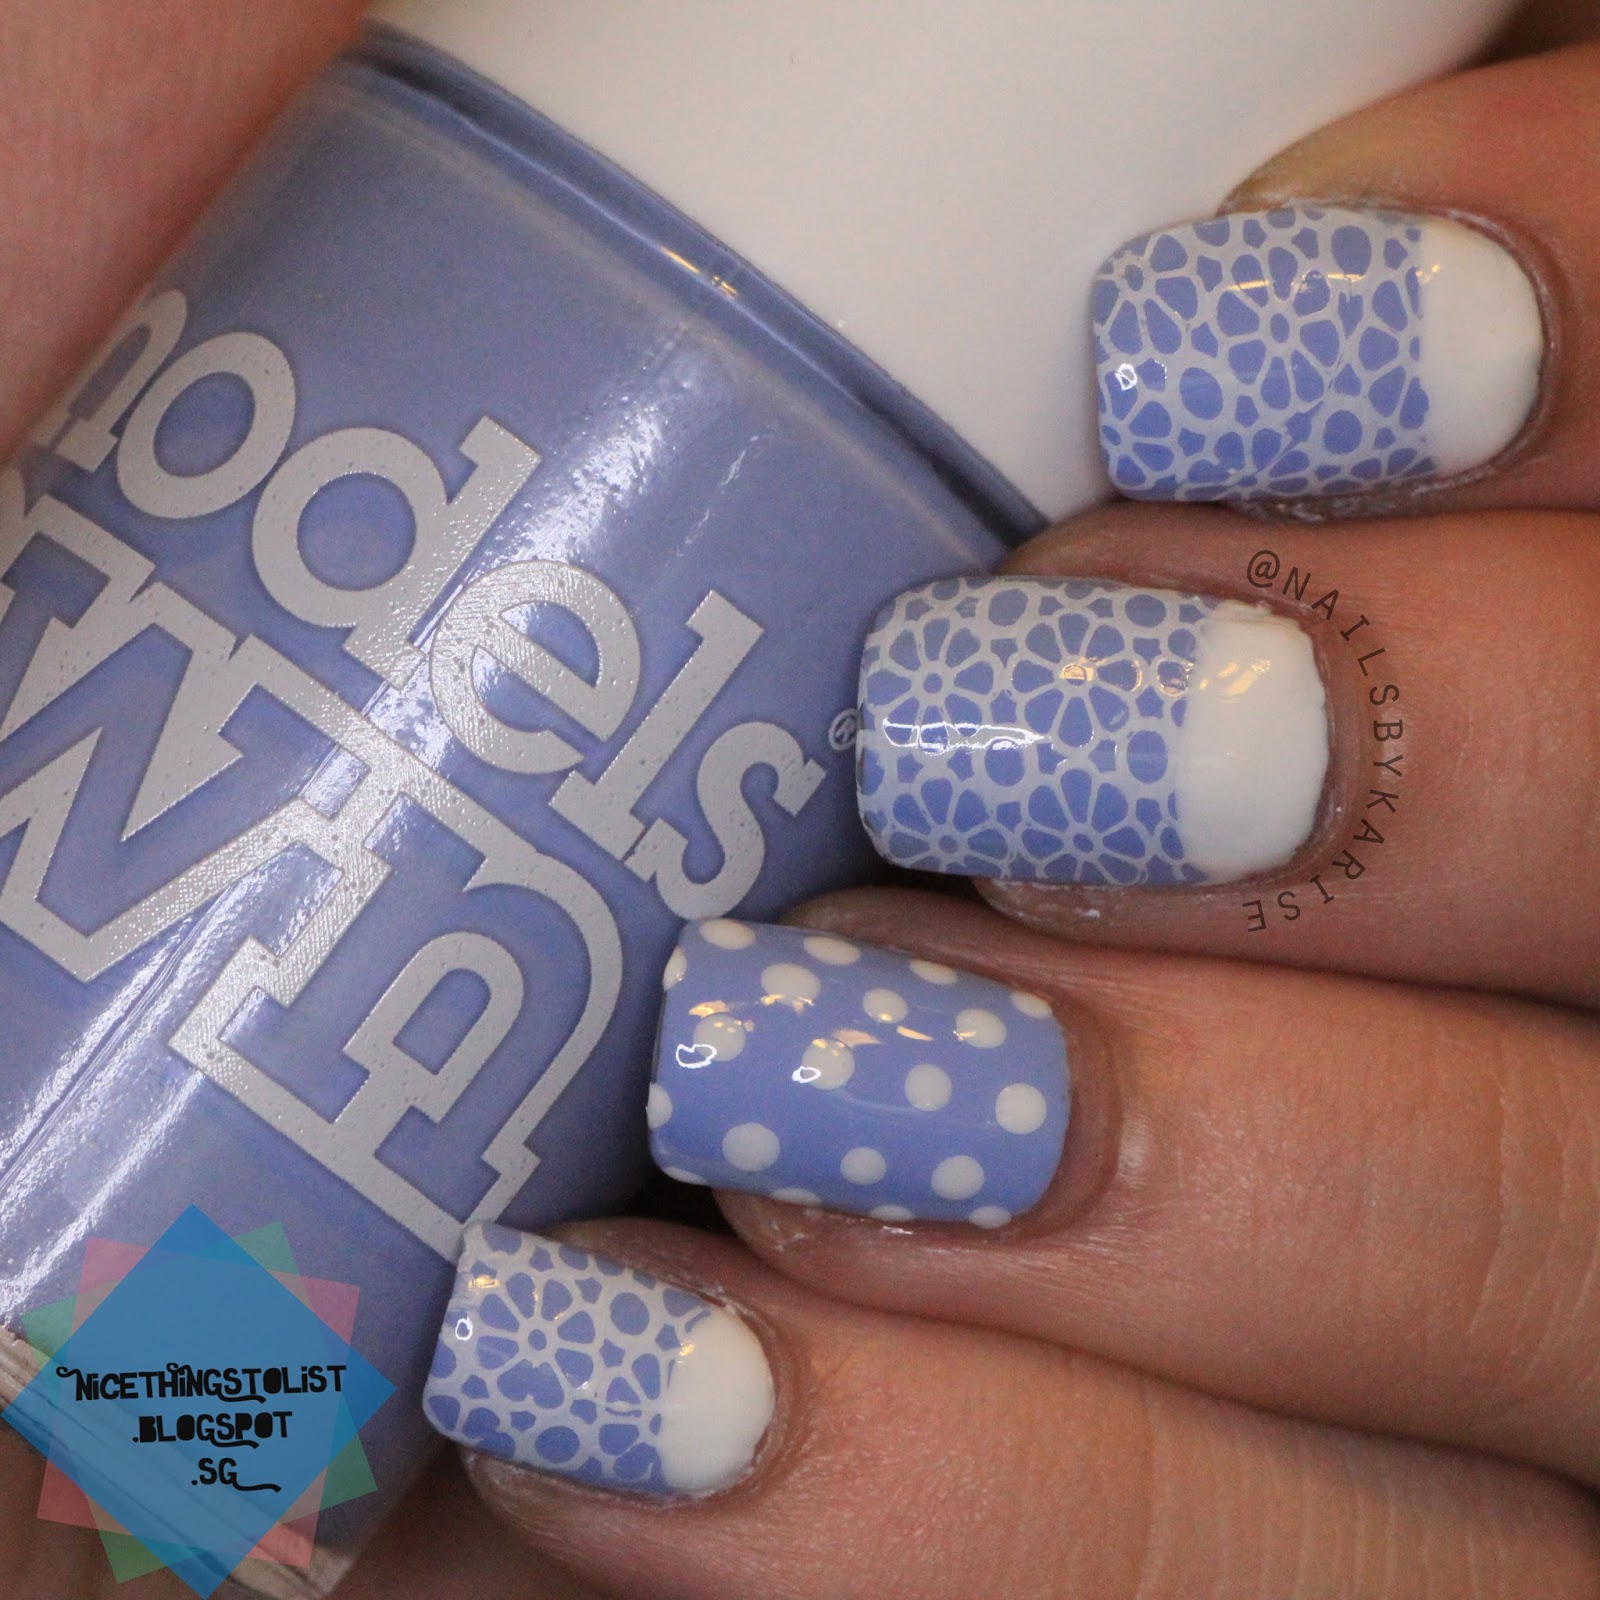 Stamping Half Moon Mani with Polka Dots - Nice Things To List